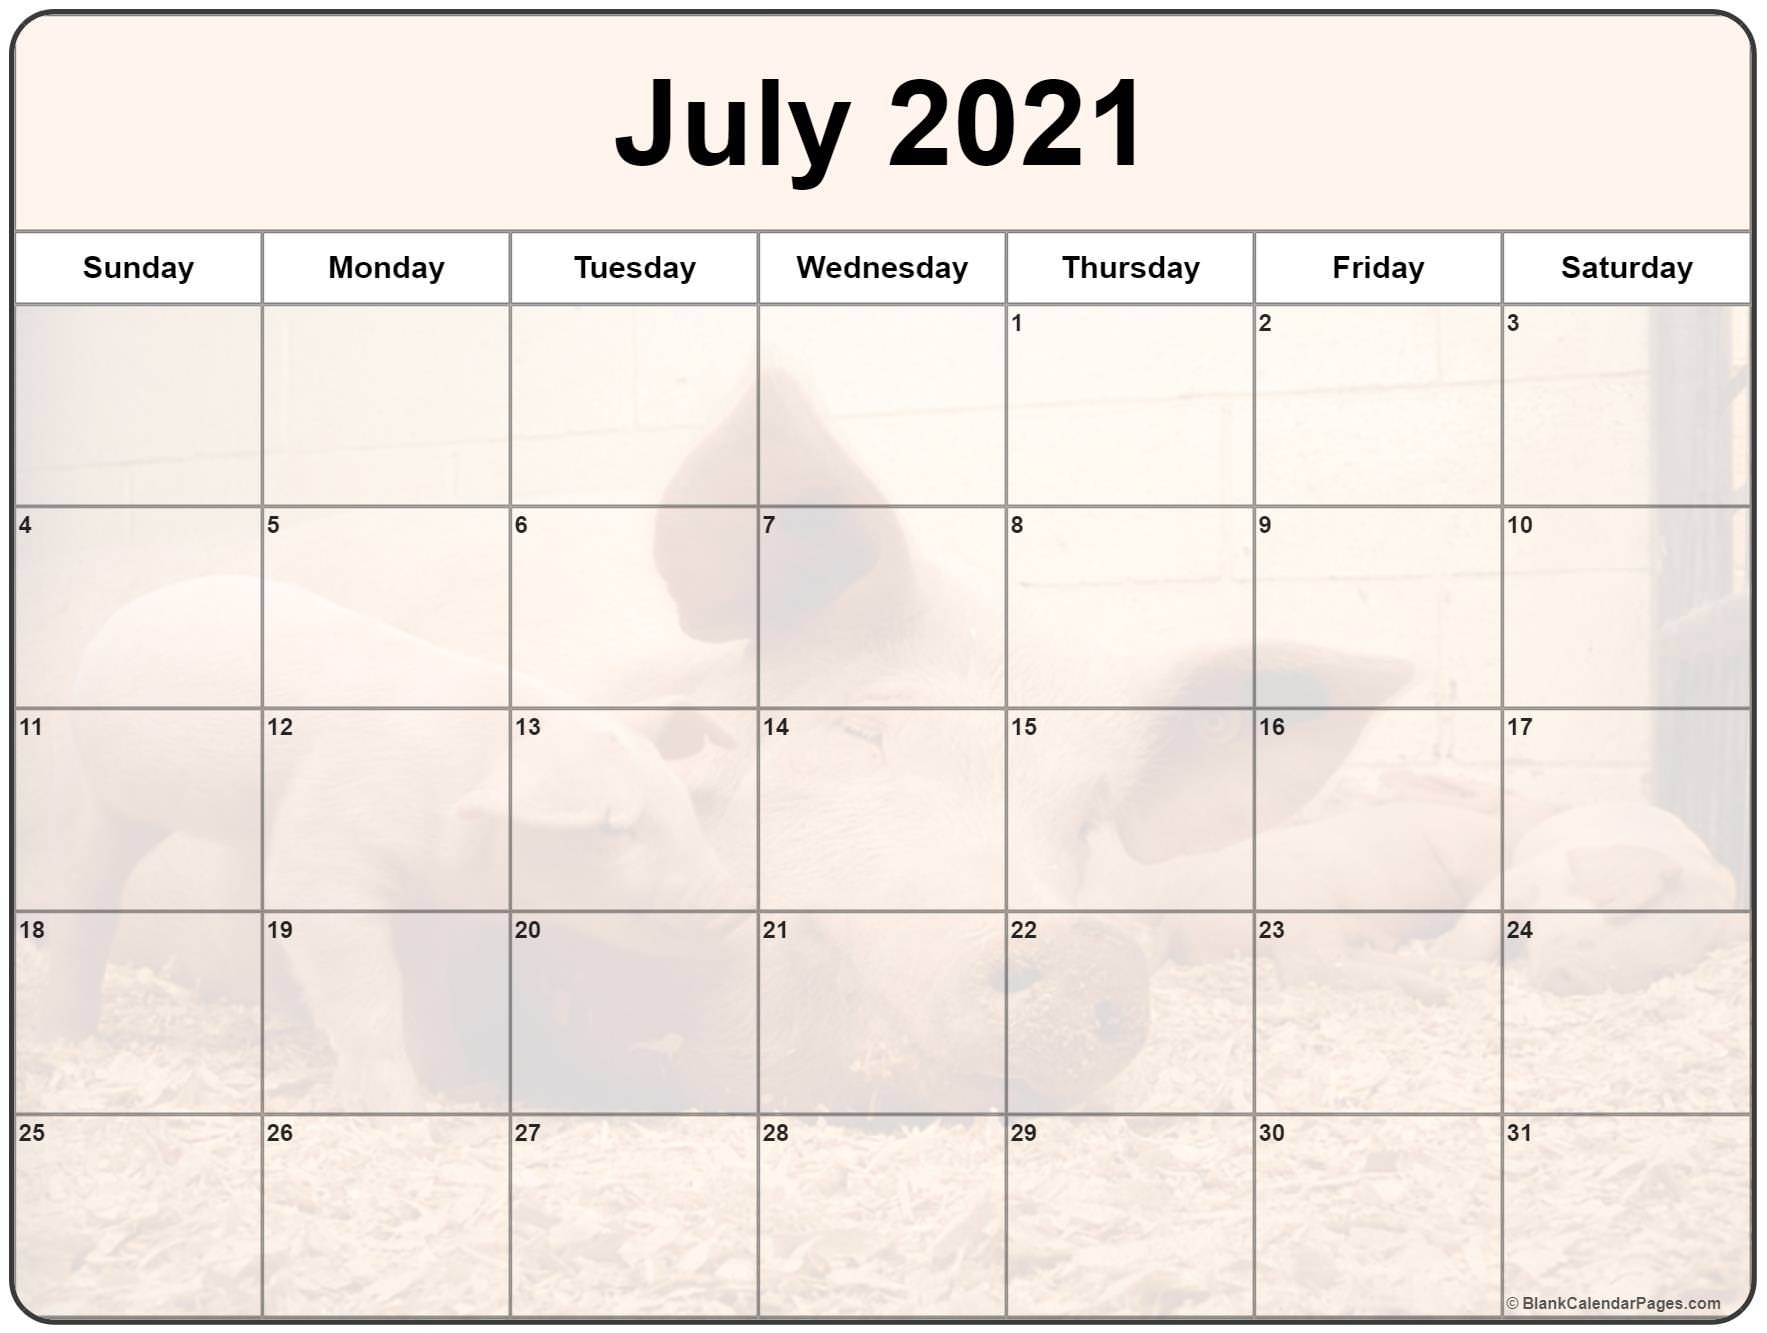 Collection Of July 2021 Photo Calendars With Image Filters. Picture Of July 2021 Calendar